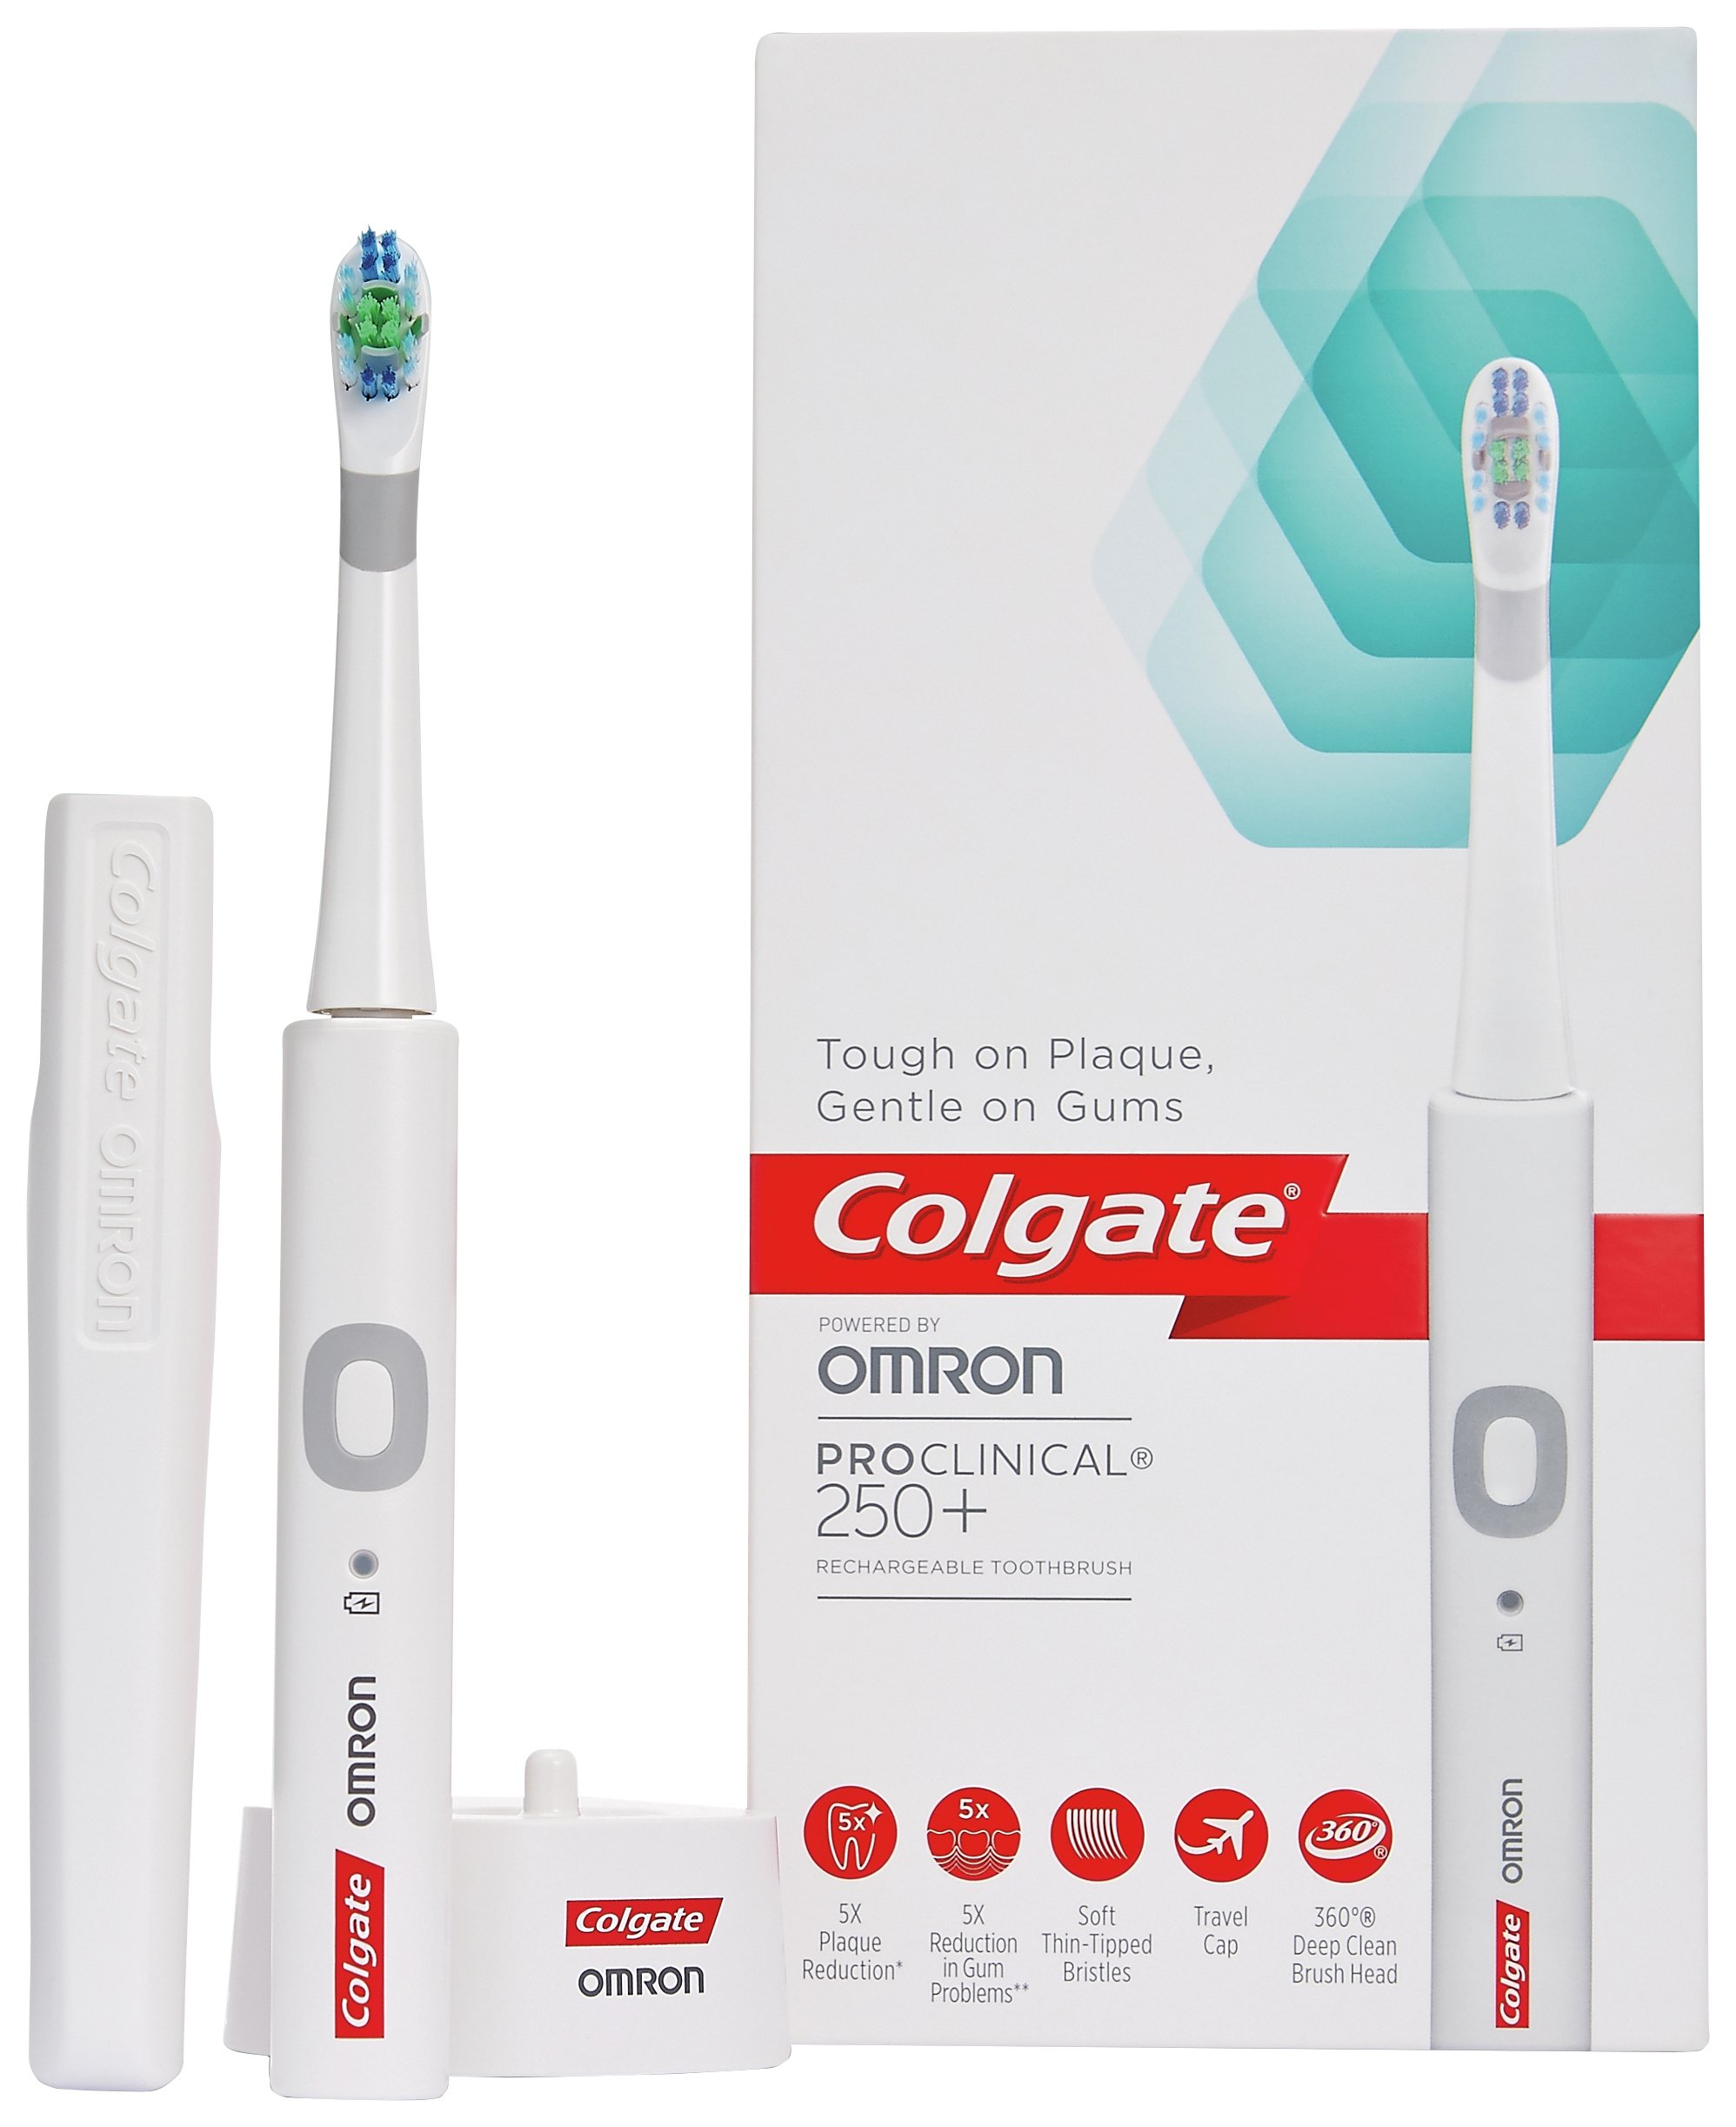 Colgate - ProClinical C250 - Electric Toothbrush Review